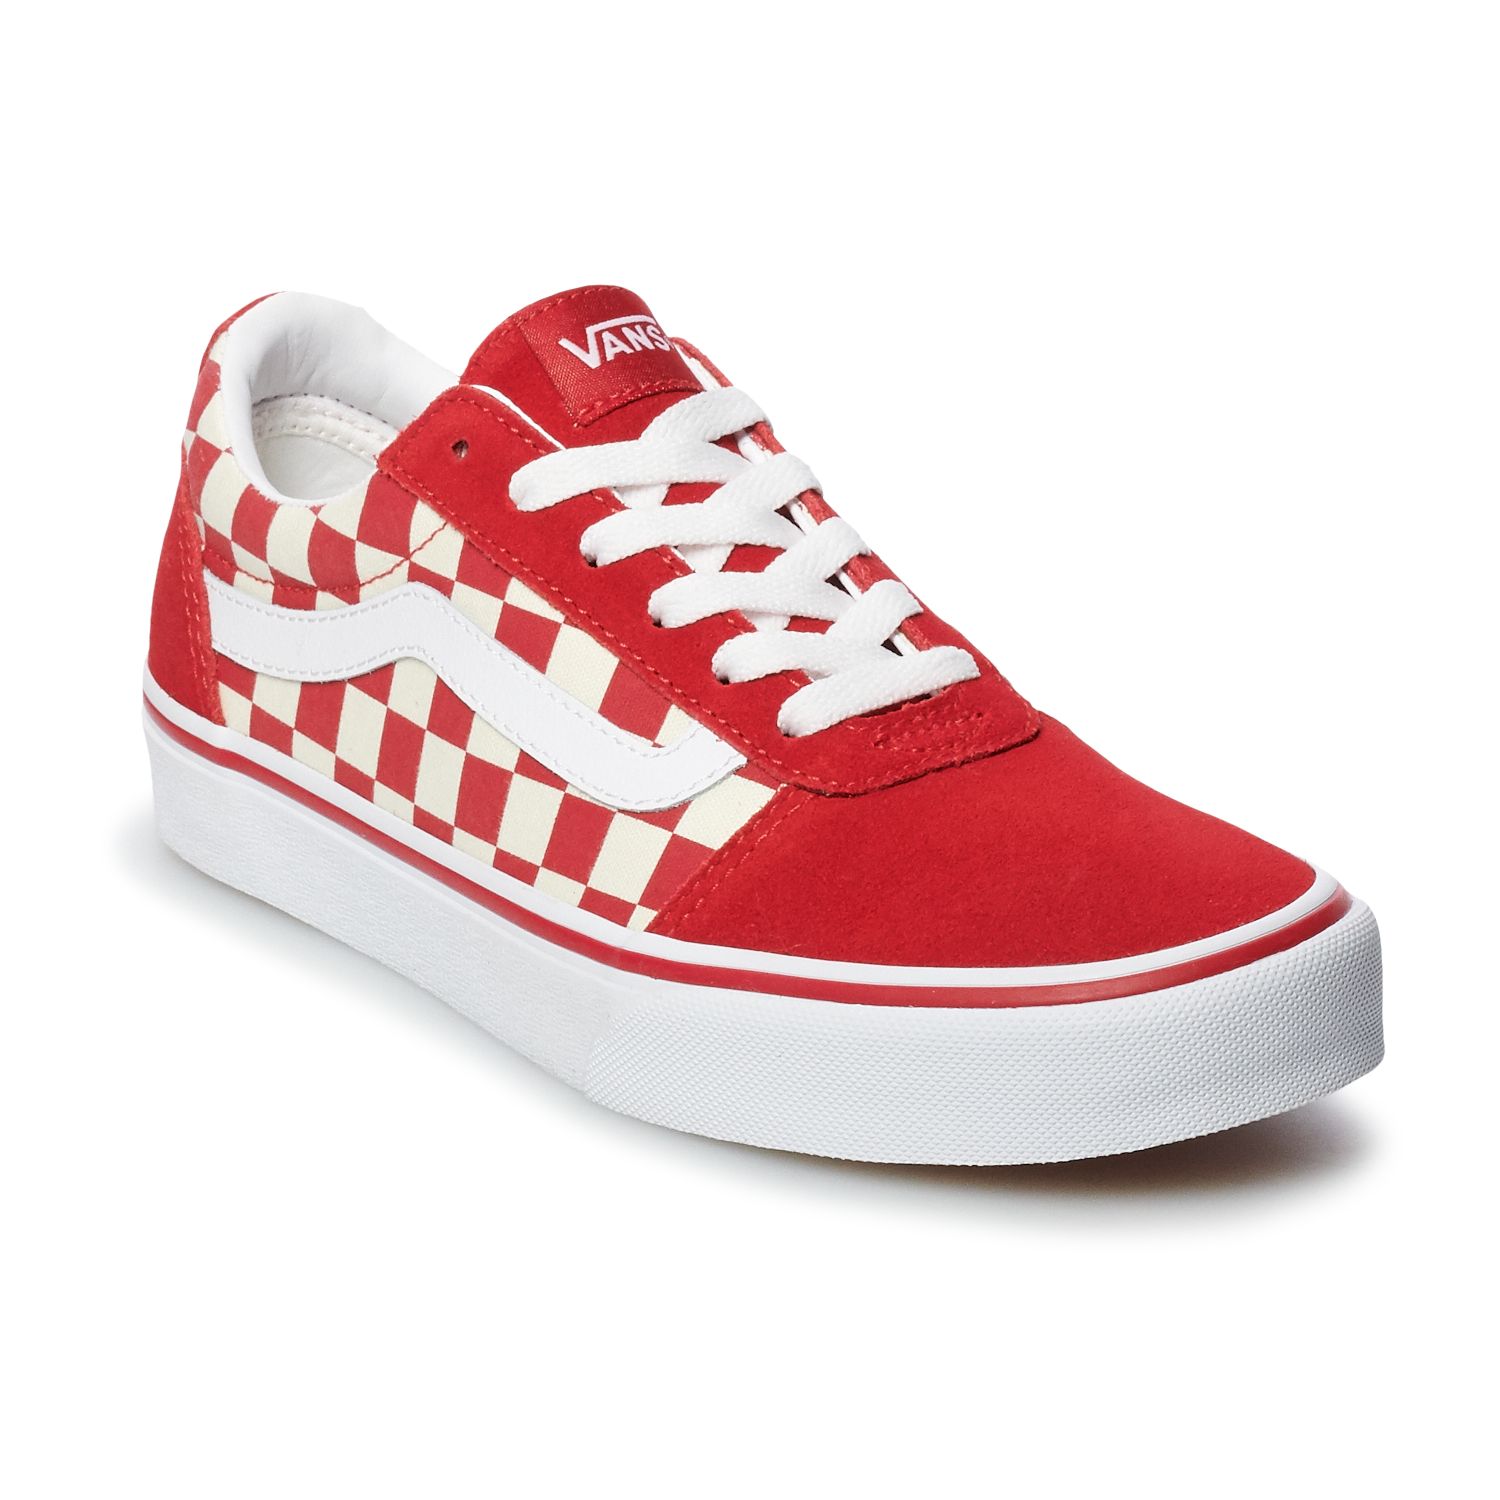 Red Vans Fashion Shoes | Kohl's